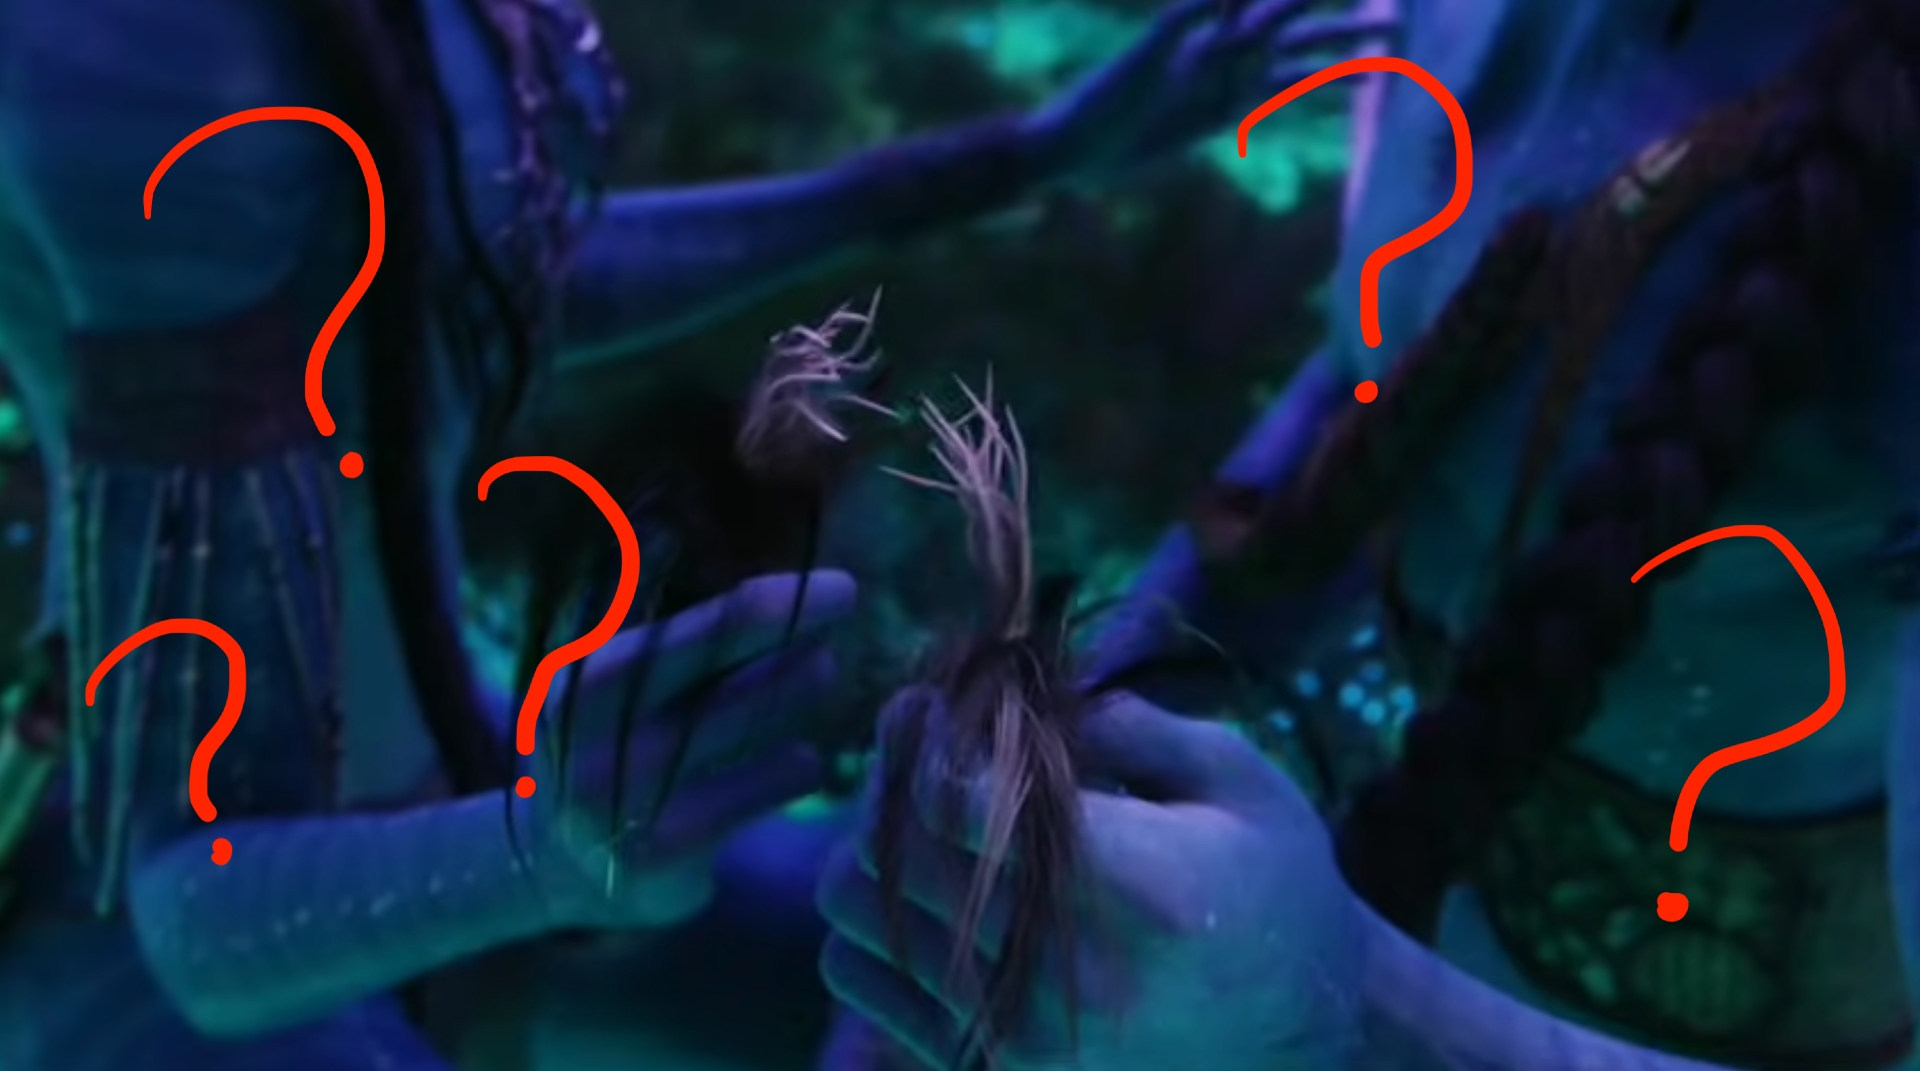 EXCLUSIVE: Is There Hair Sex in the New 'Avatar' Movie? - Hell Gate